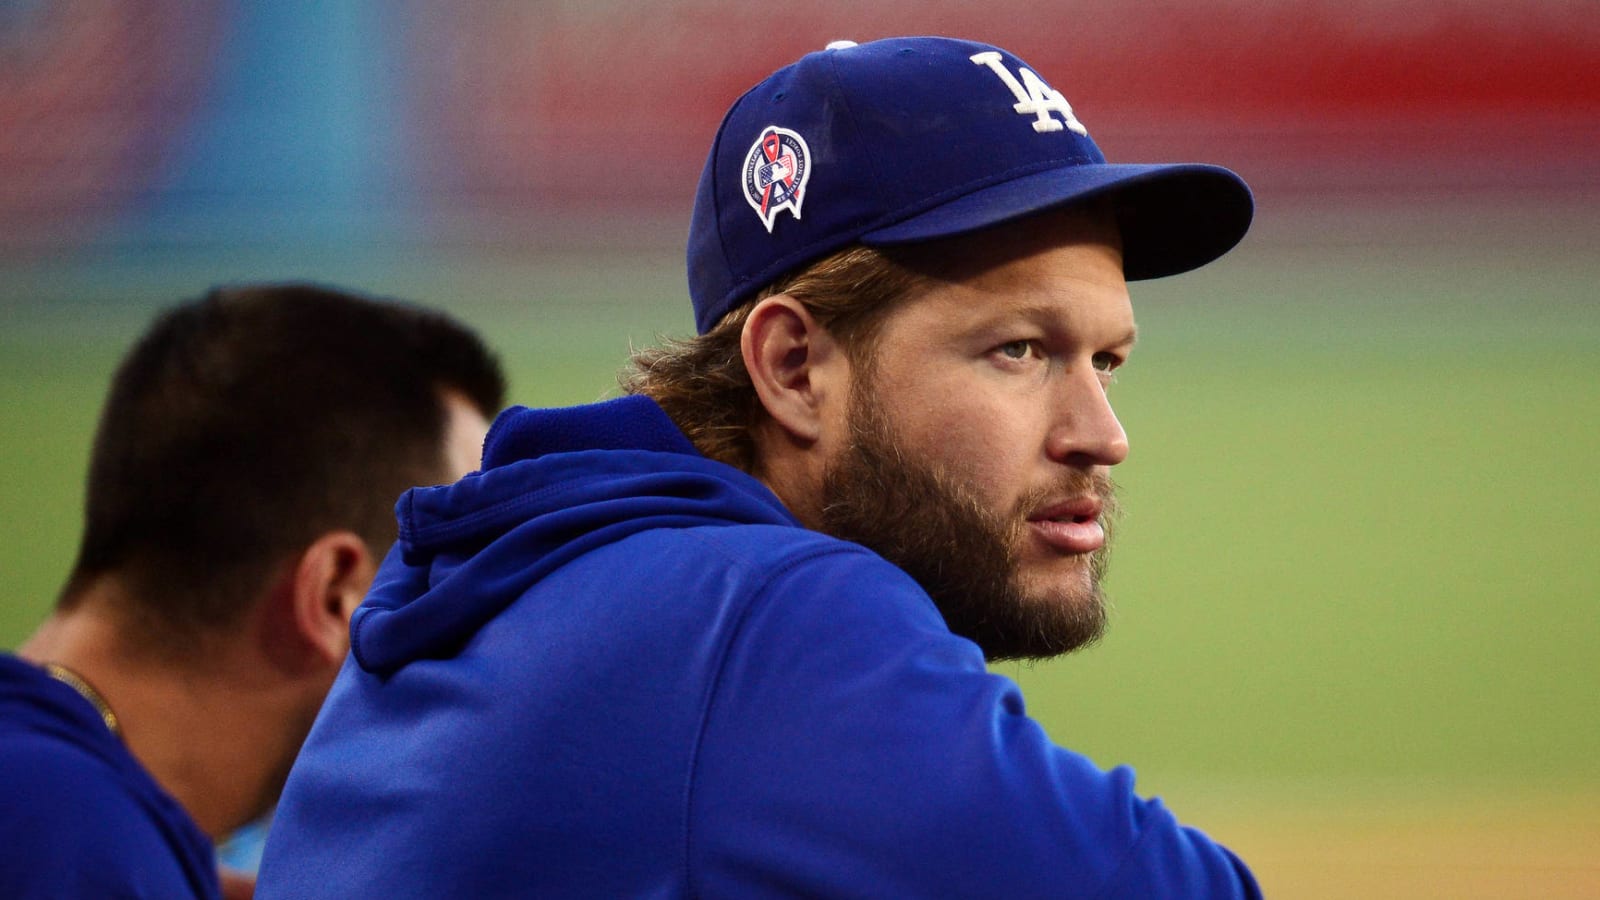 Will Clayton Kershaw retire? Latest news, updates on Dodgers ace's